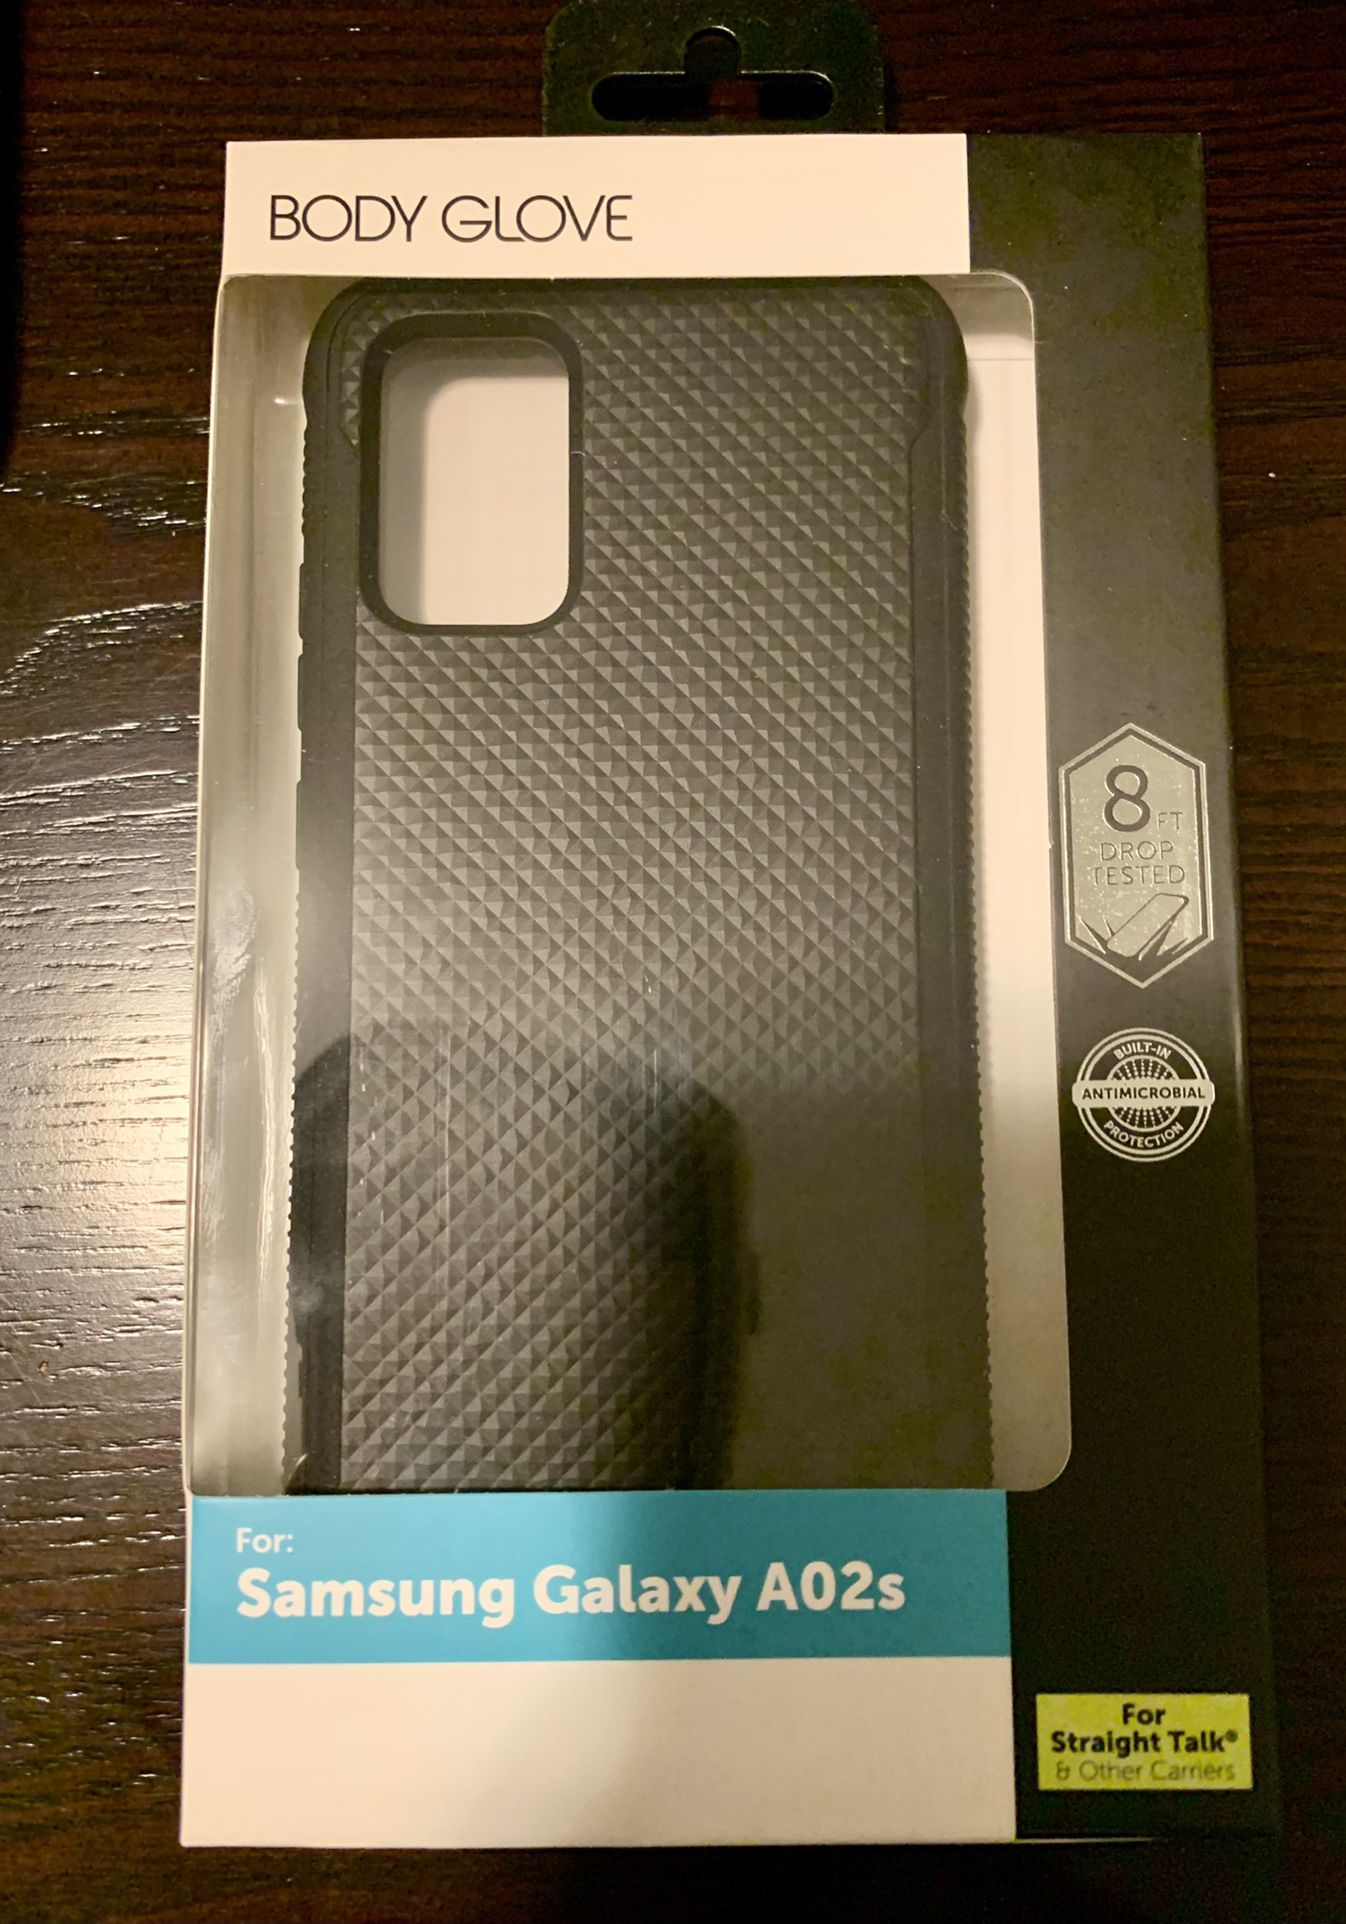 Body Glove for Samsung Galaxy A02s - NEW in Box